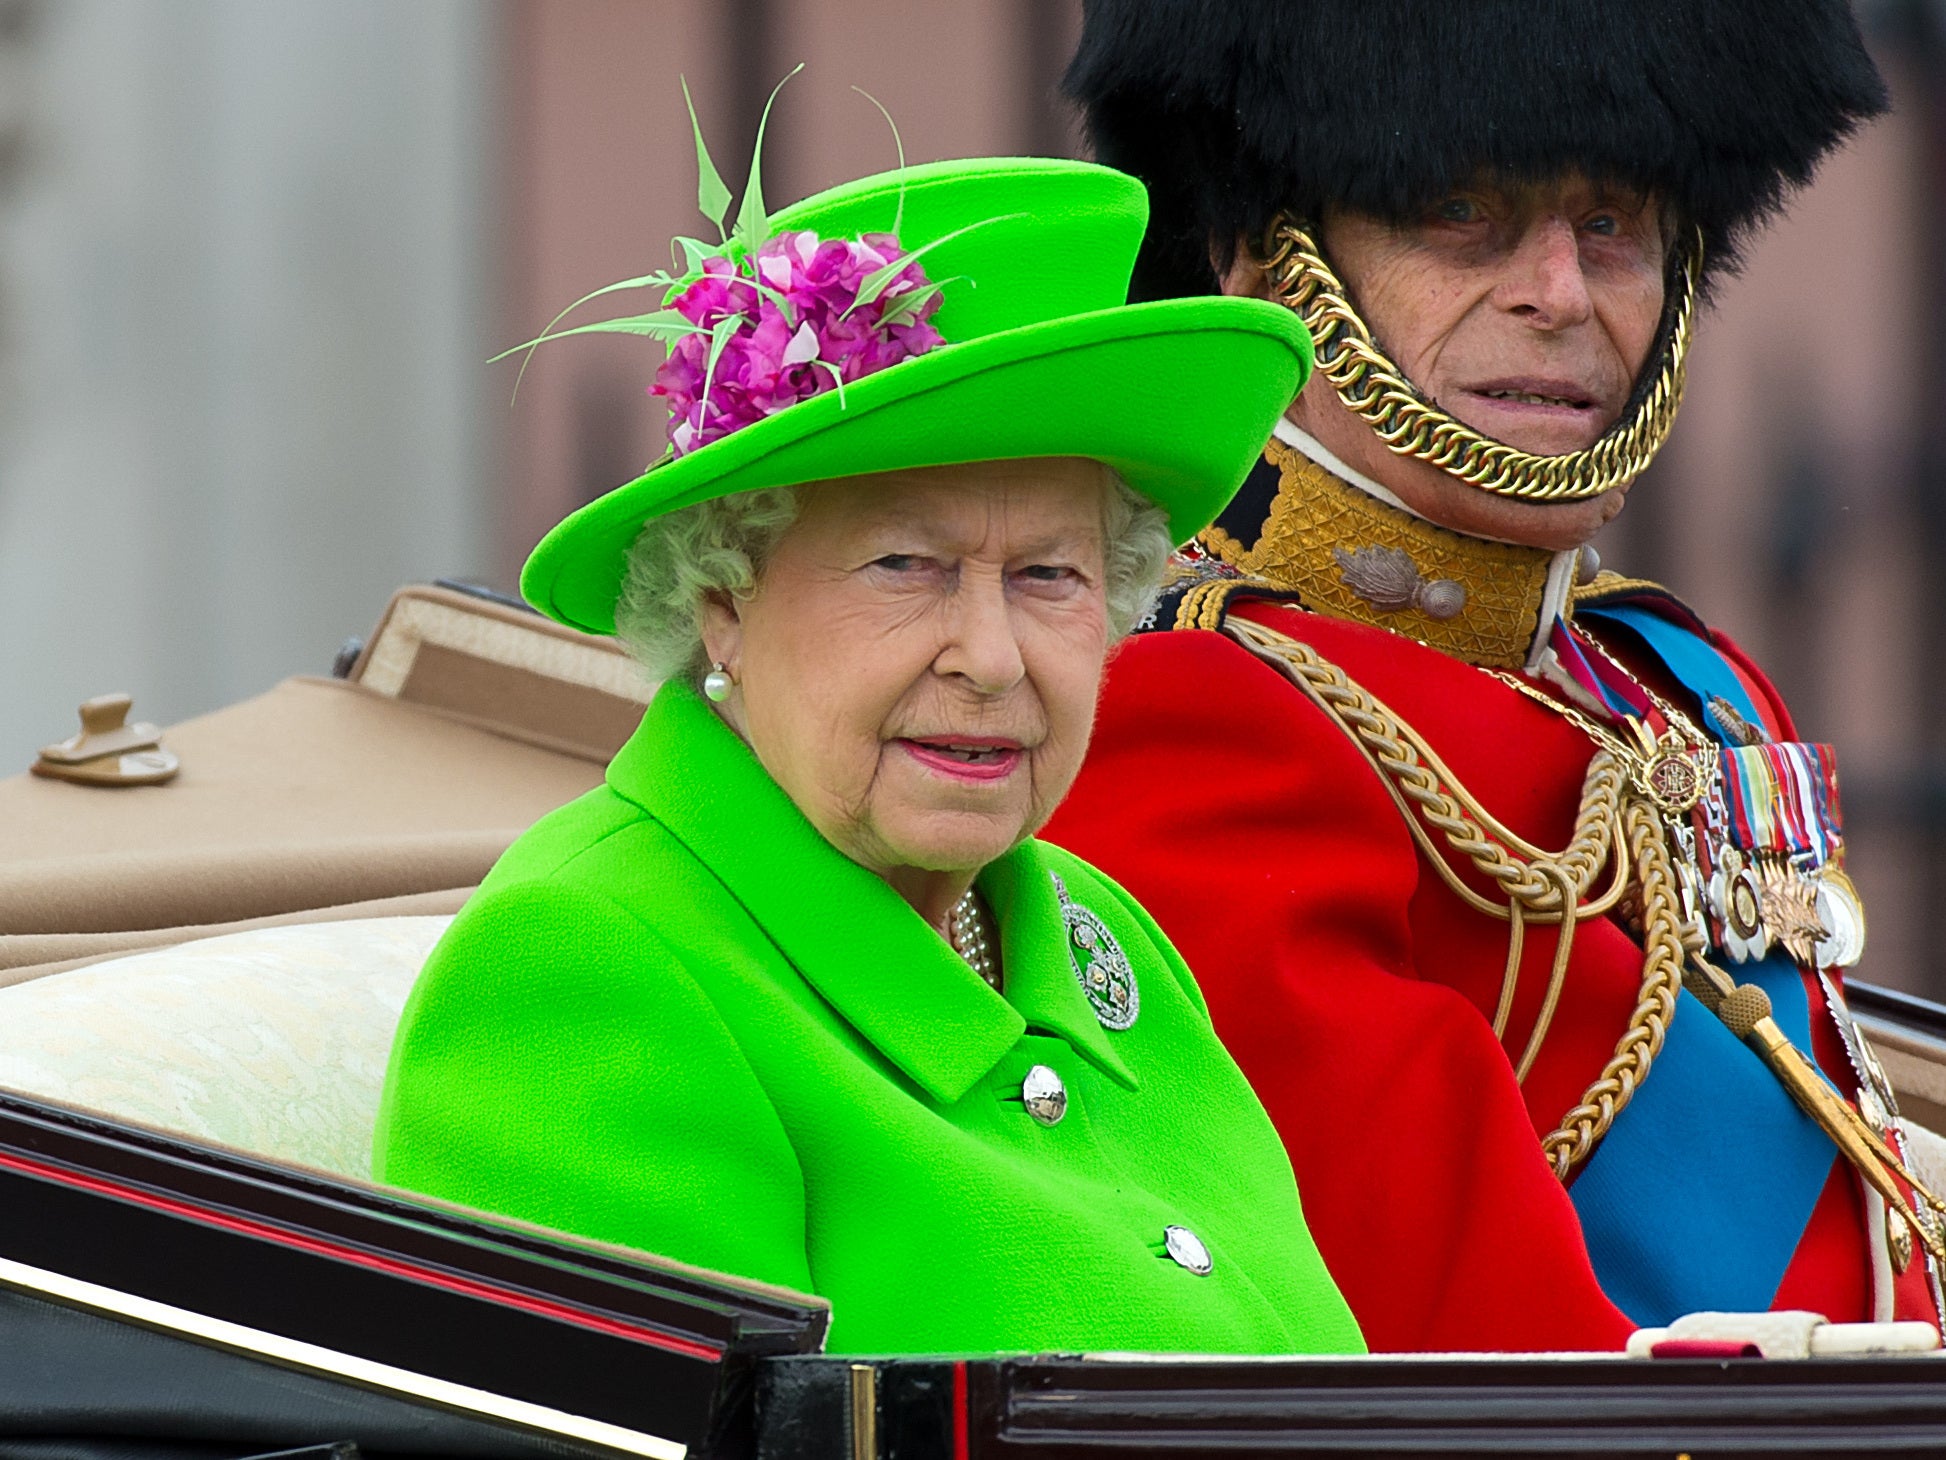 Queen Elizabeth II and Prince Philip, Duke of Edinburgh sit in a carriage during the Trooping the Colour parade, 11 June 2016